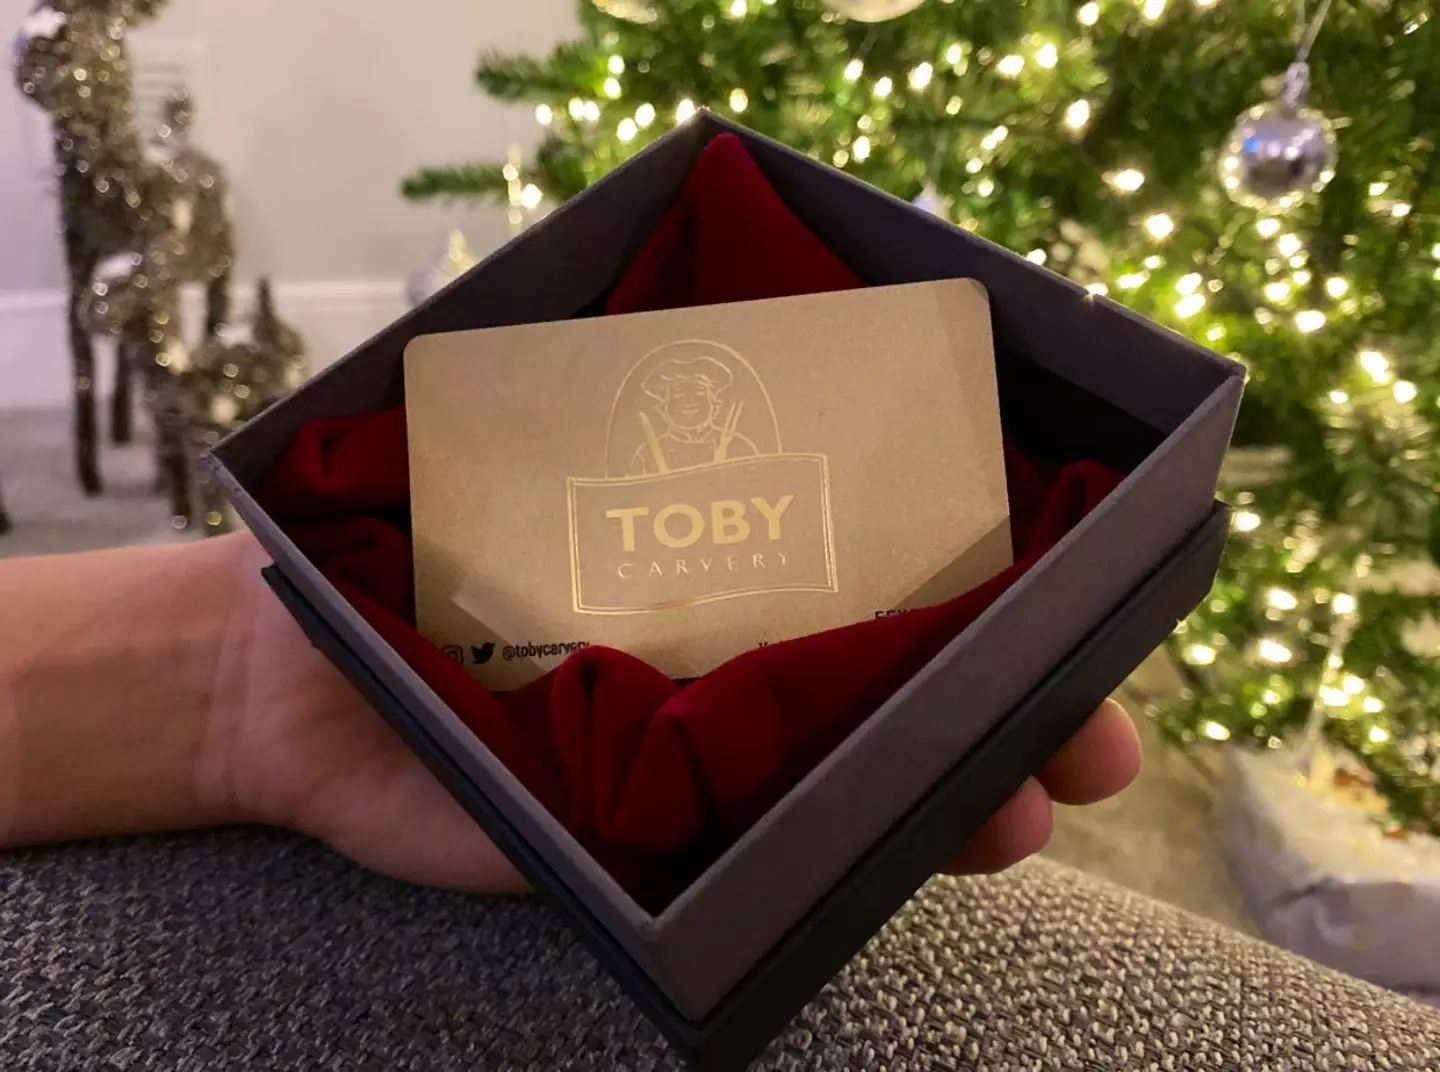 Many famous faces have been gifted a Toby Carvery Gold Card.